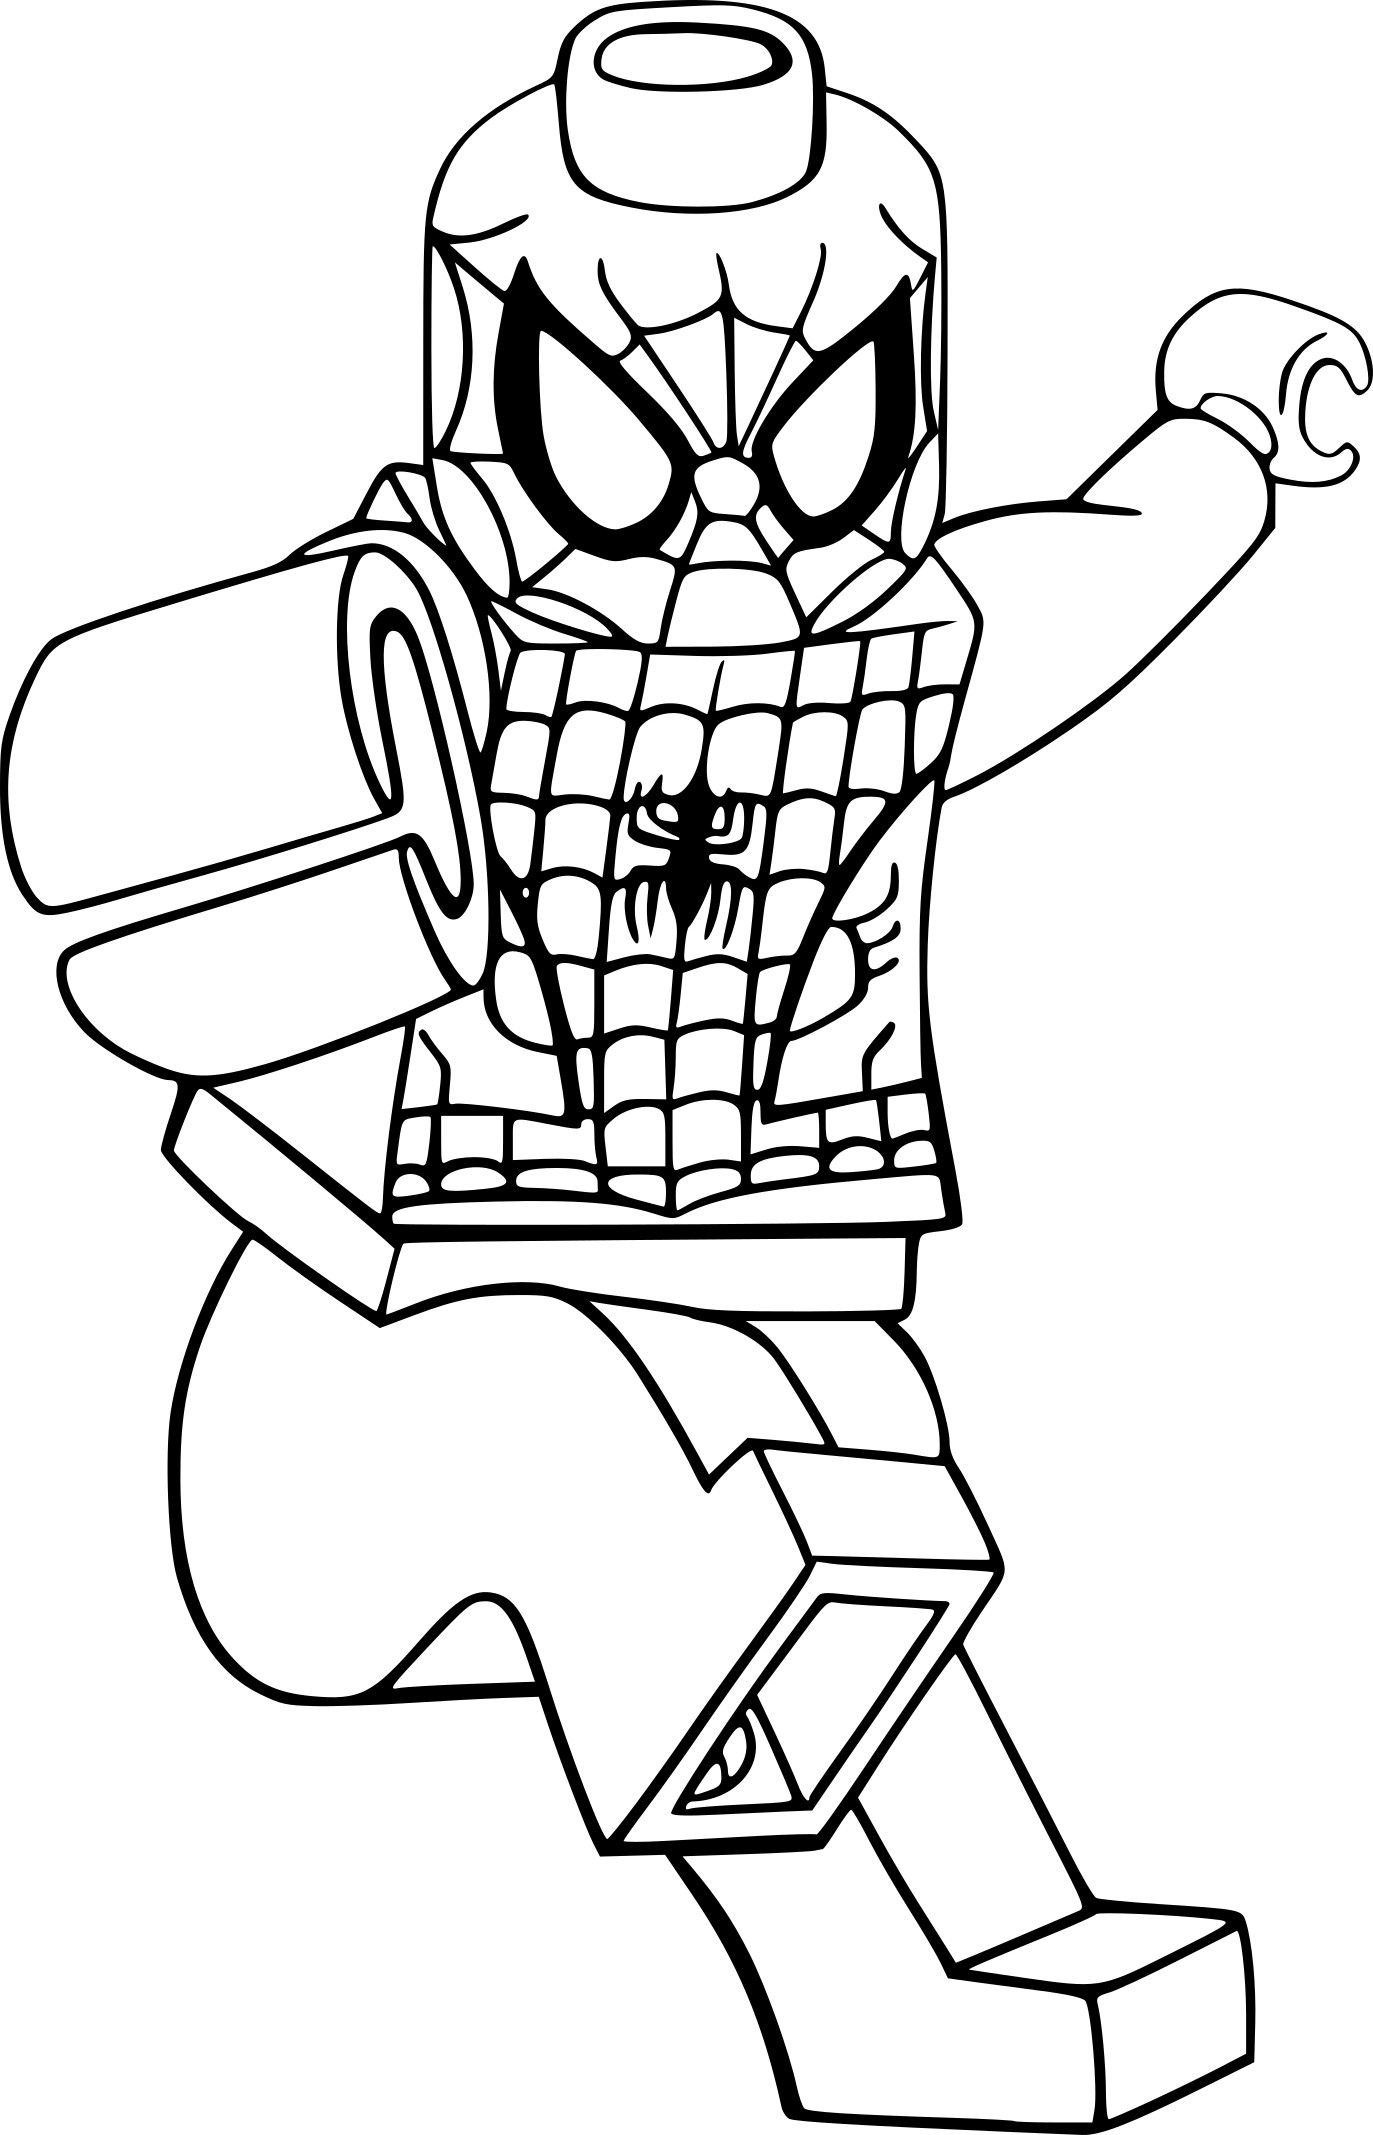 Pin By Chris On Coloriages Sympas | Spiderman Coloring, Lego Coloring à Coloriage Hulk Et Spiderman